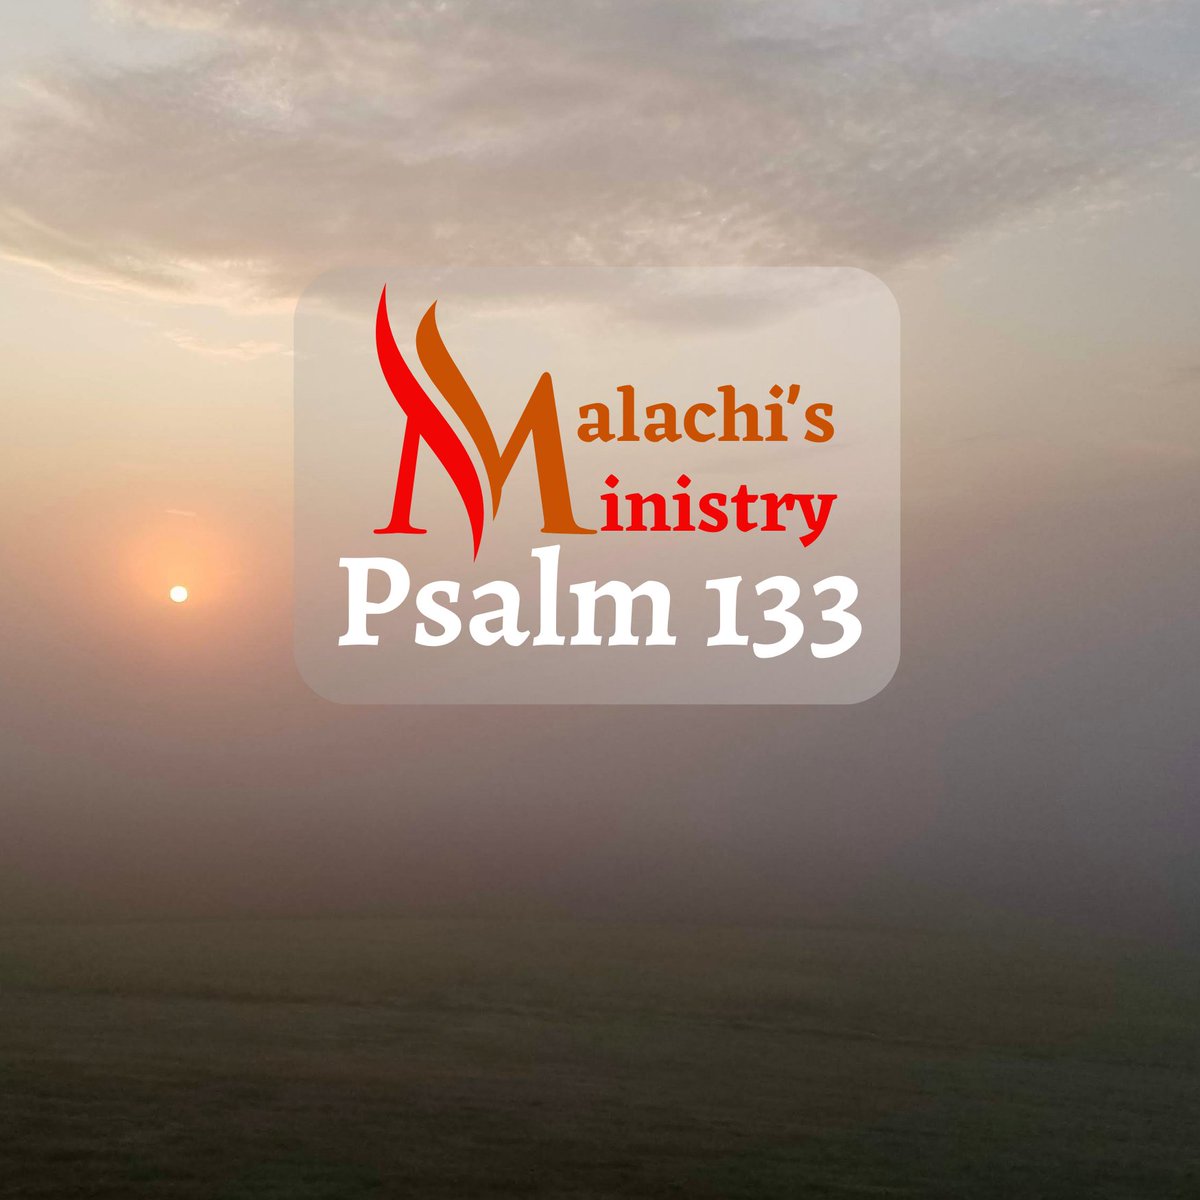 #Psalm133
Behold,
how good and how pleasant it is for us to dwell together in unity!

#psalmaday #bookofpsalms #psalmsofpraise #dailyprayer #malachisministry